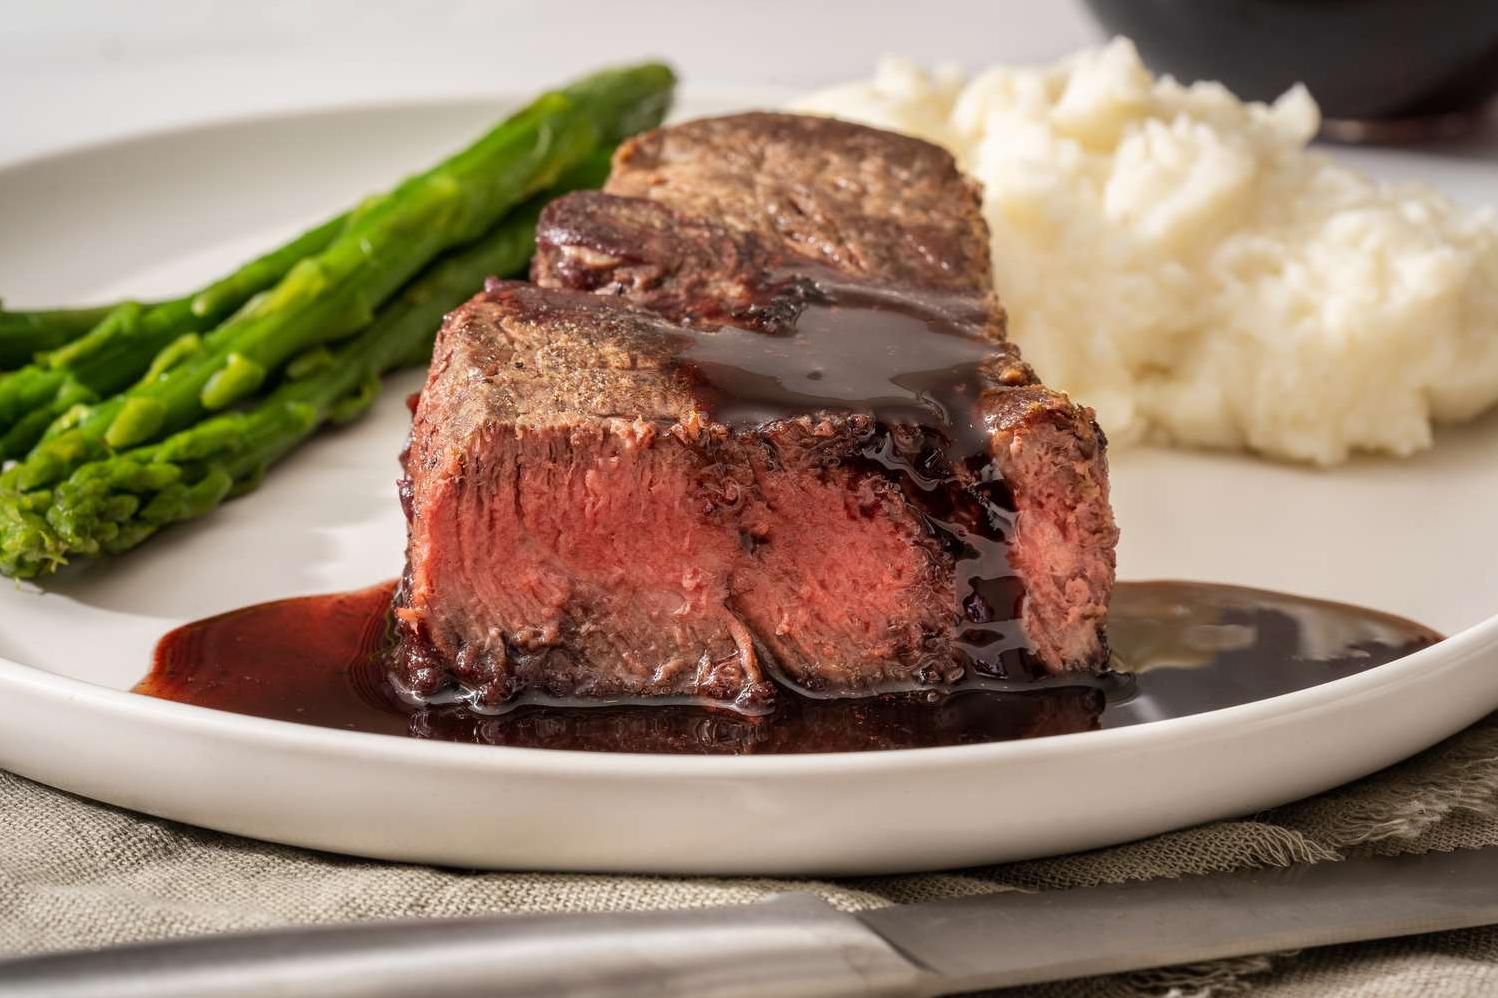  Treat yourself to a steak bathed in a flavorful red wine marinade.